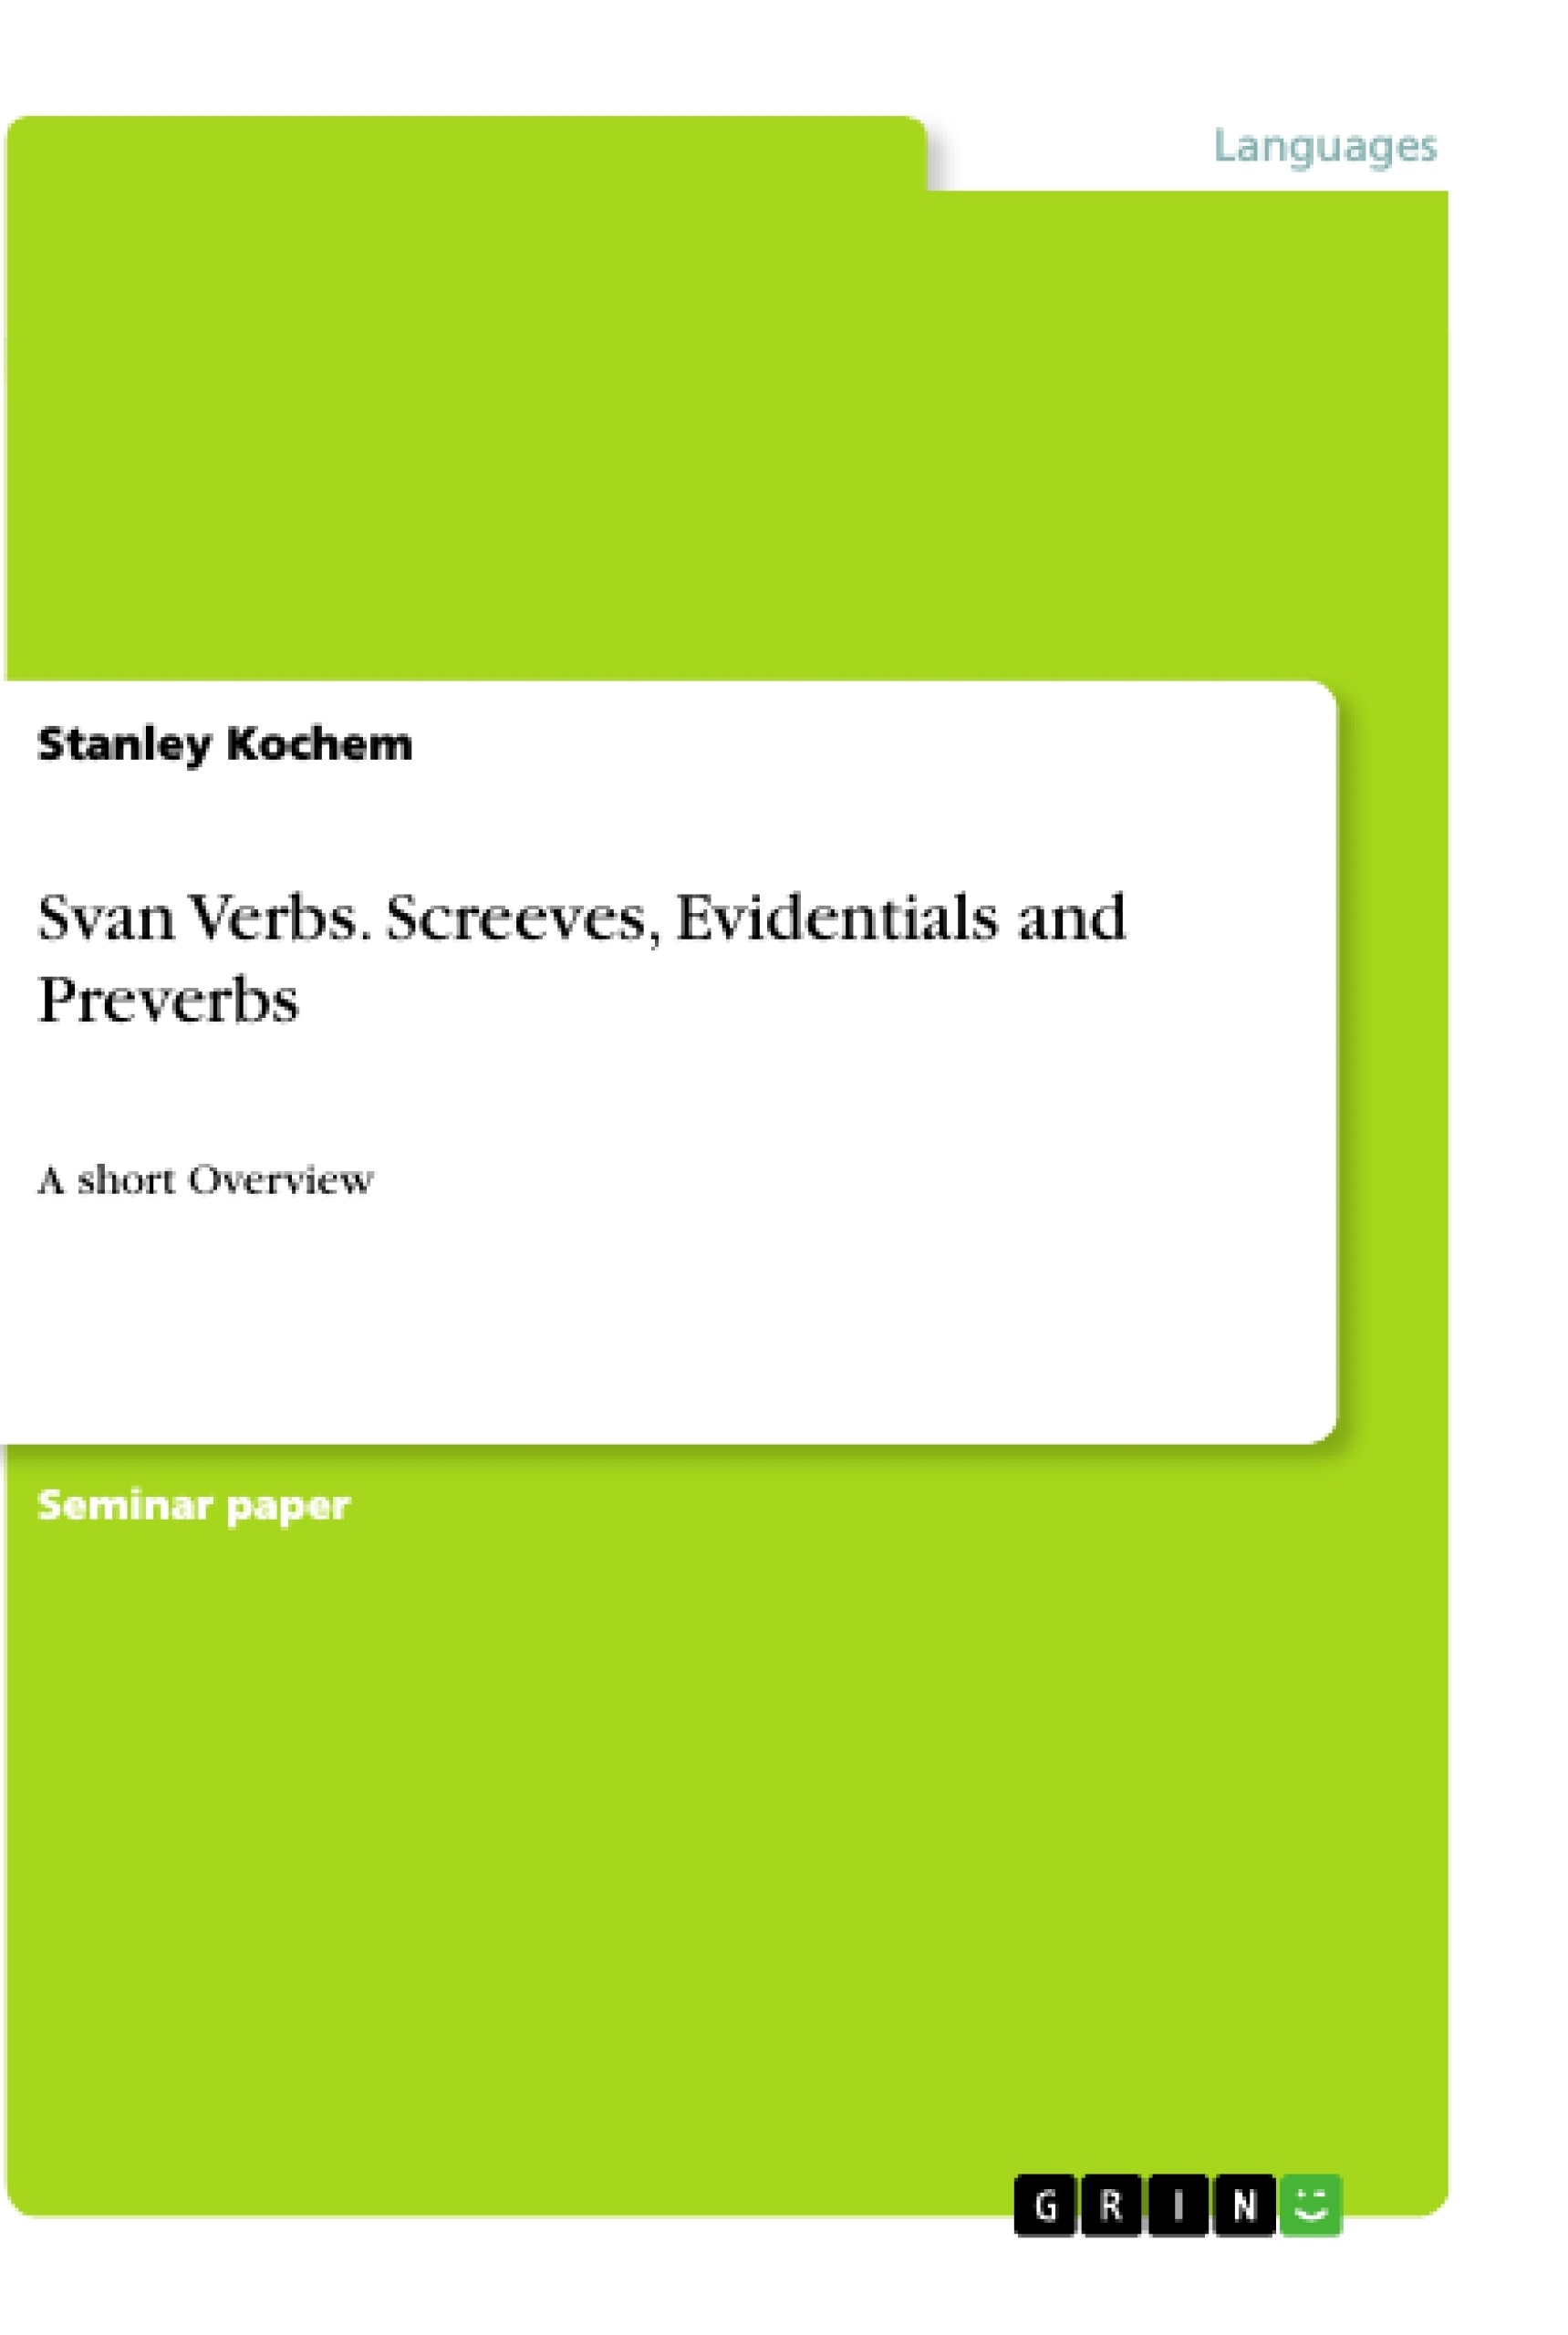 Title: Svan Verbs. Screeves, Evidentials and Preverbs